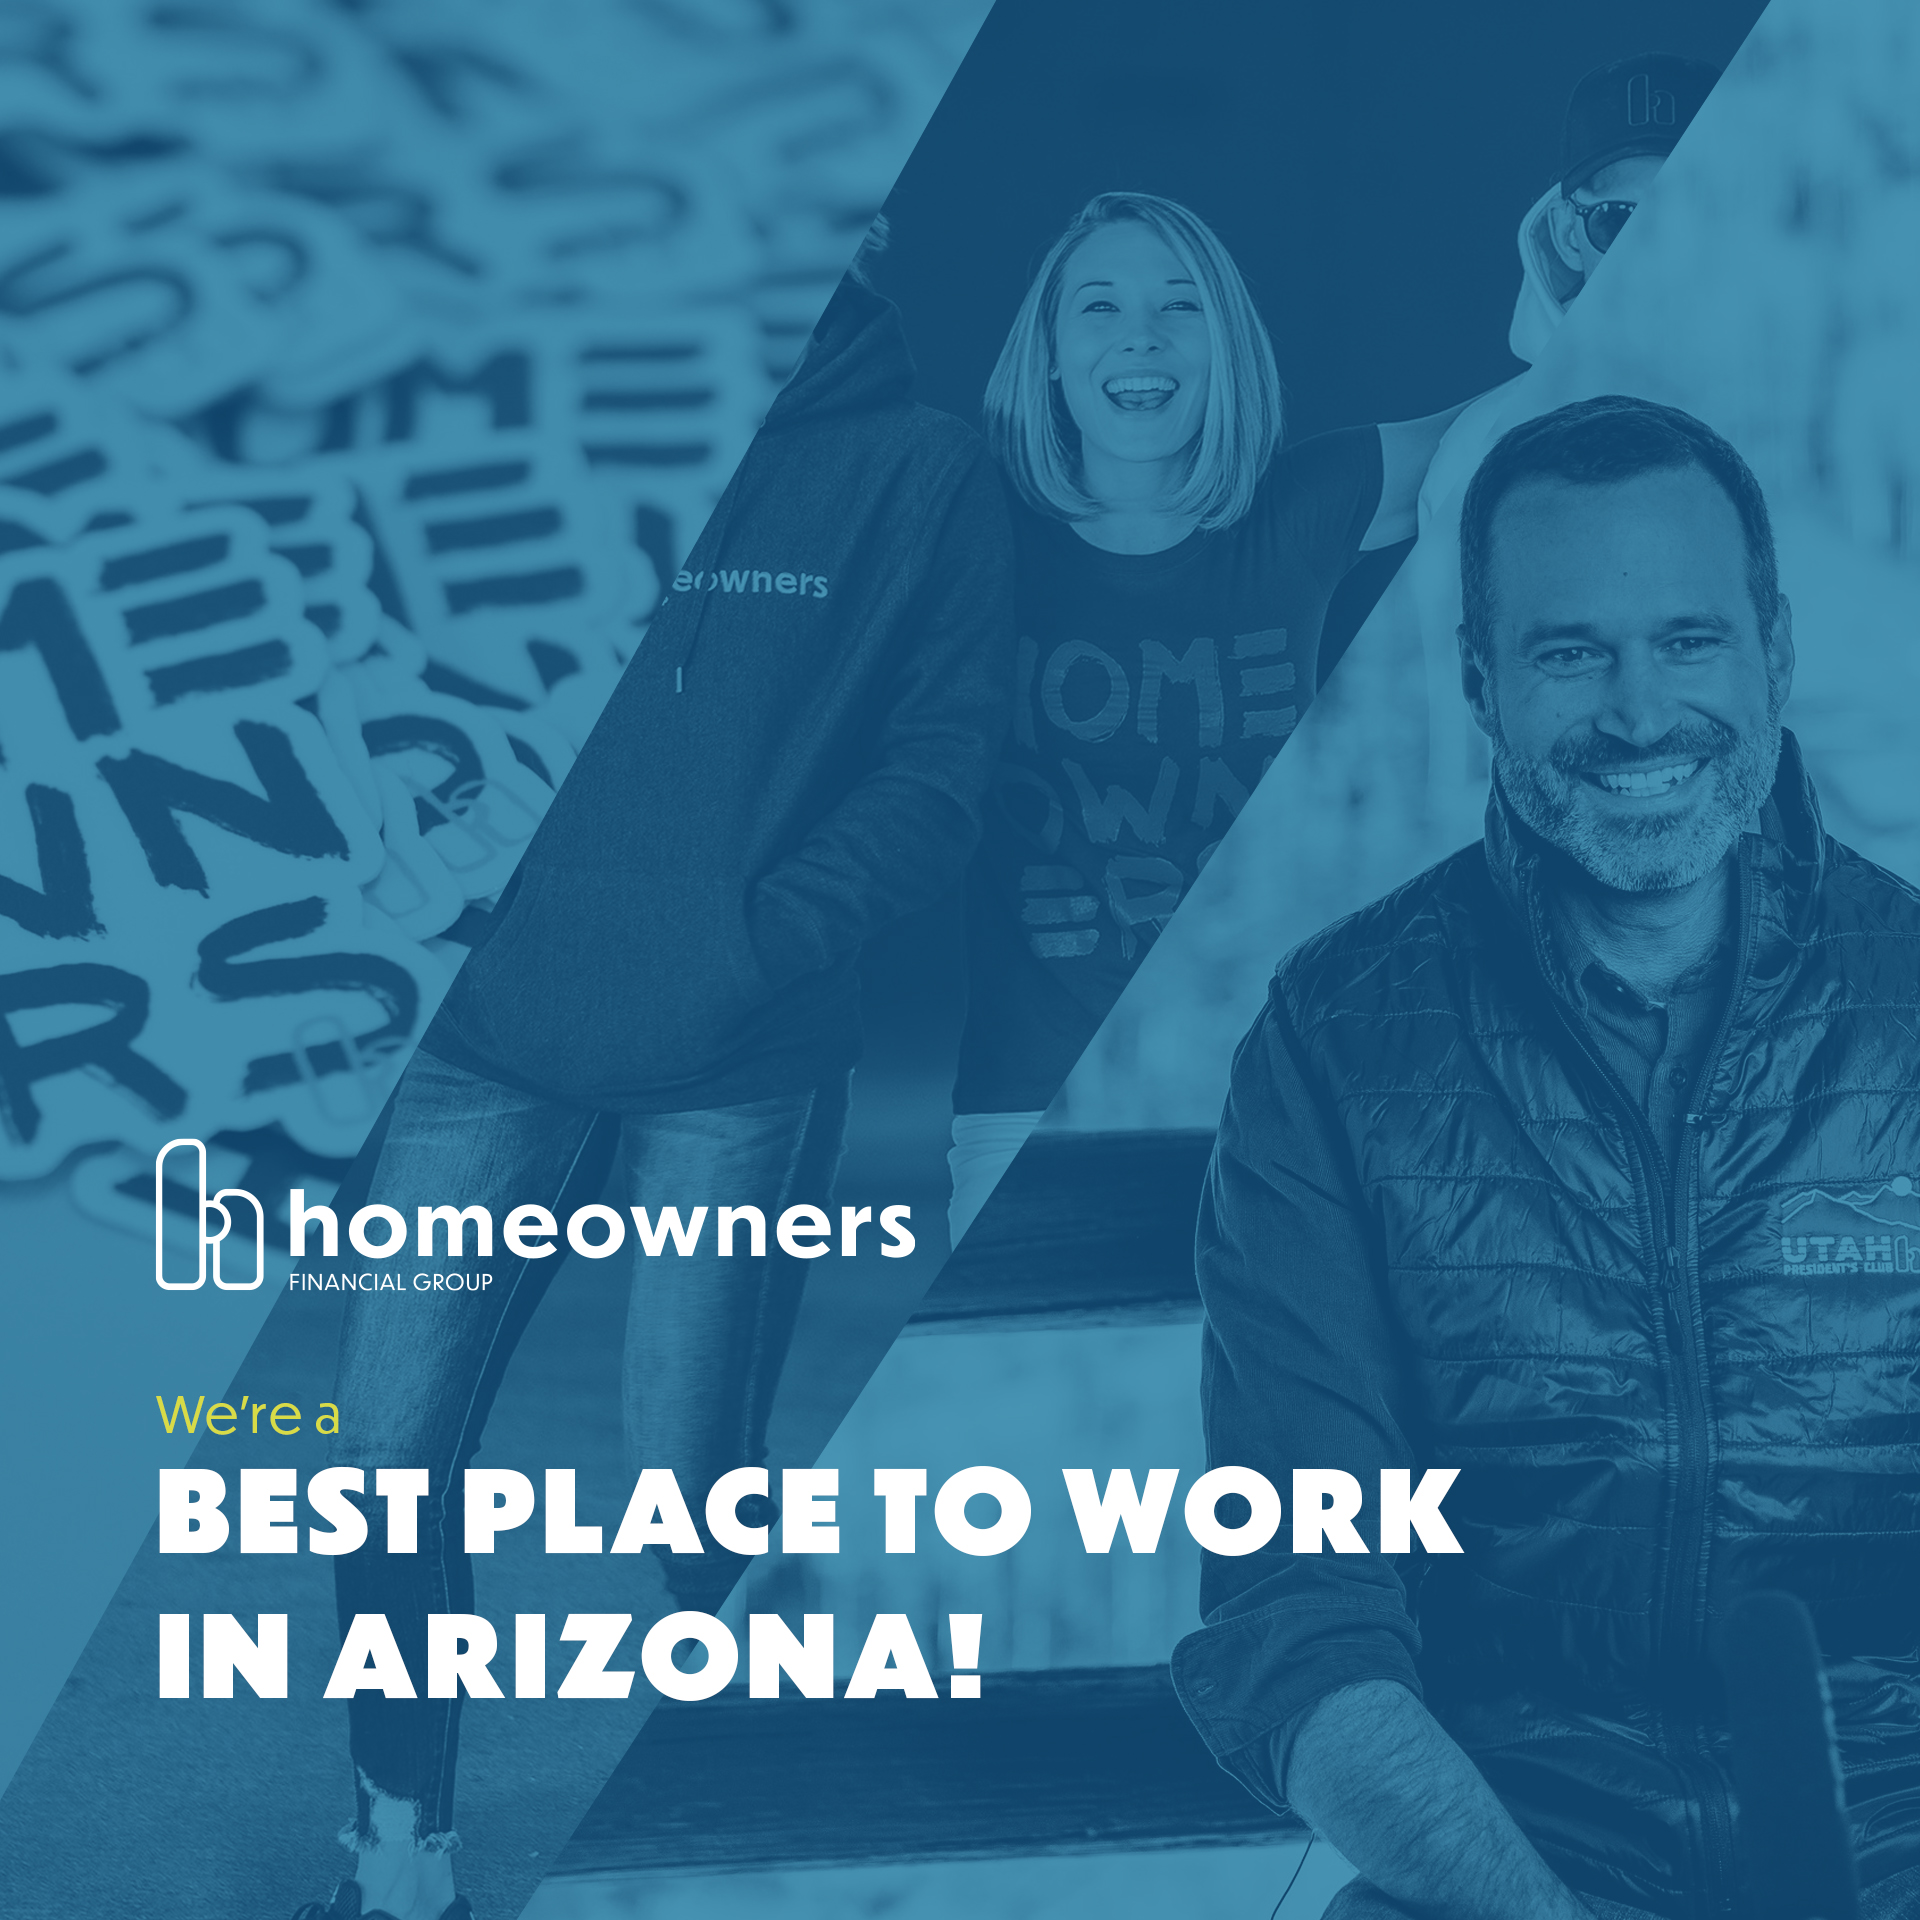 Homeowners Named Among 100 Best Places to Work and Live in Arizona